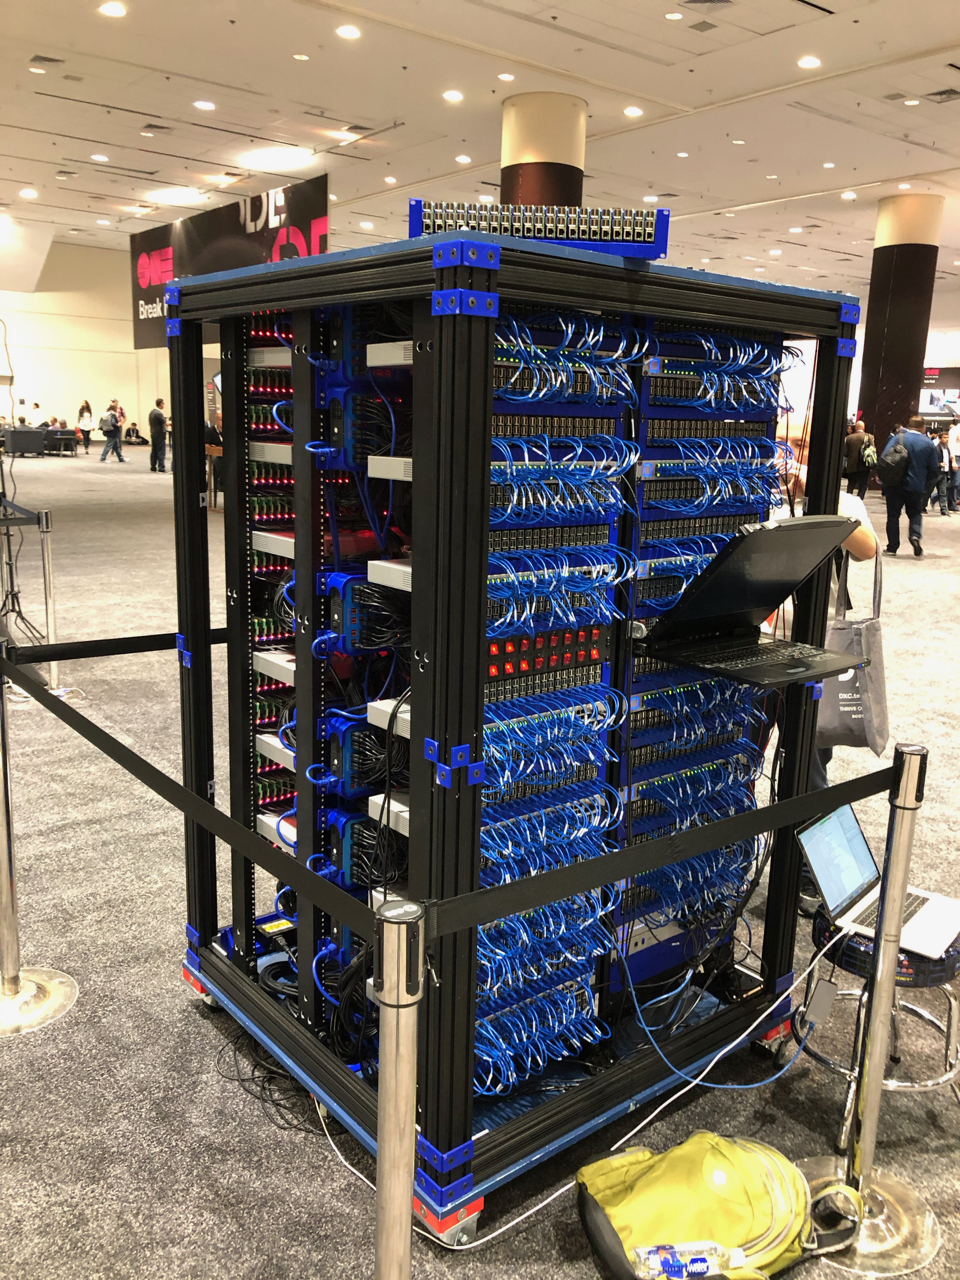 Oracle 1060 Pi Cluster source